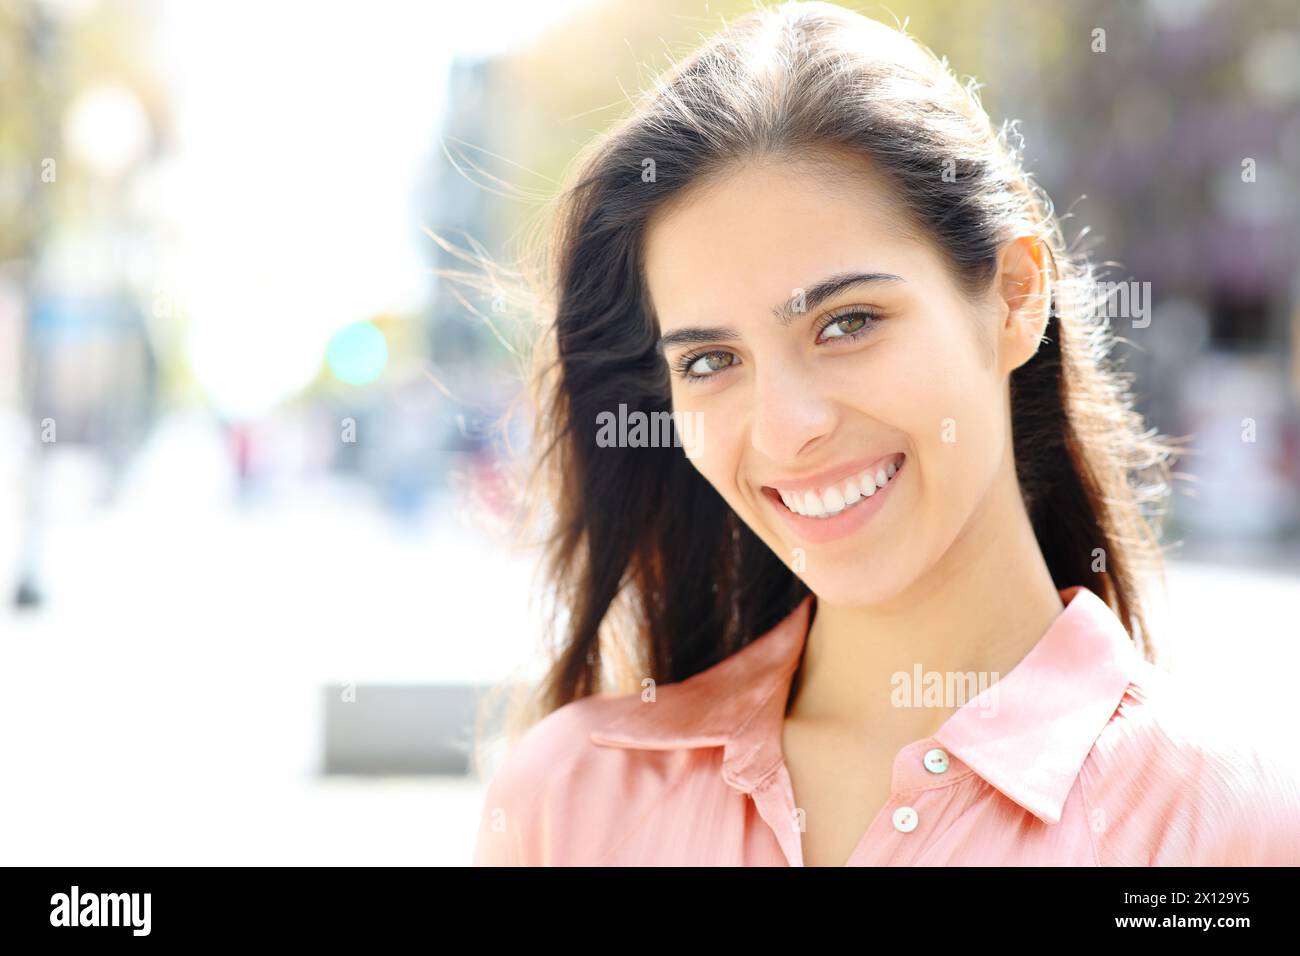 Portrait of a happy woman with white smile posing standing in the street Stock Photo